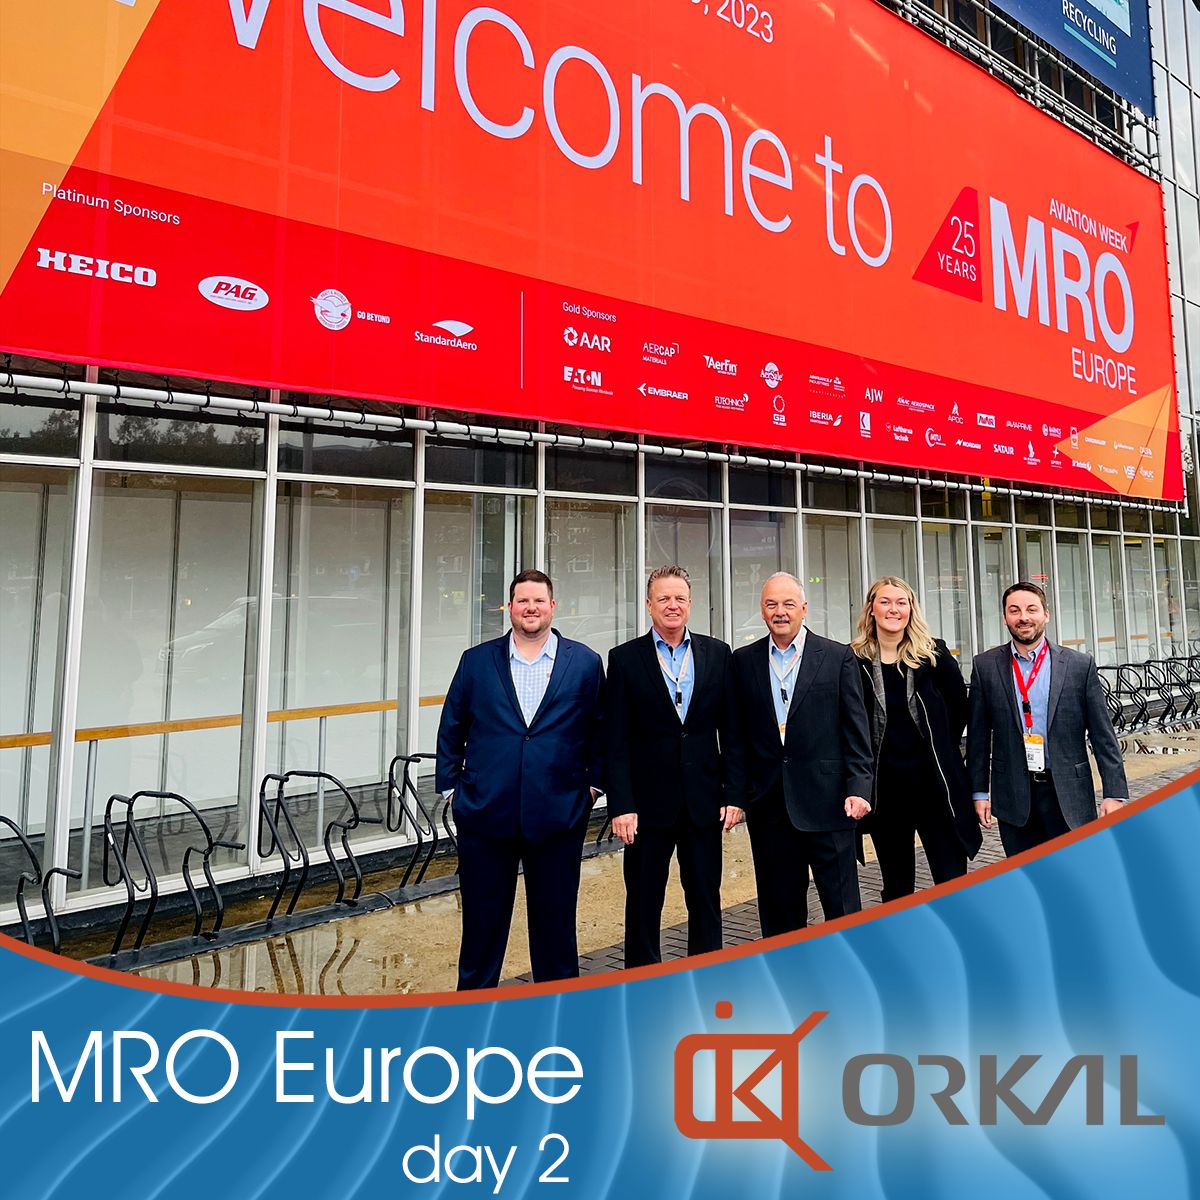 orkal, five individuals showcase orkal industries' mro europe presence: offering aircraft-grade tooling, repair services, and innovative assembly solutions.